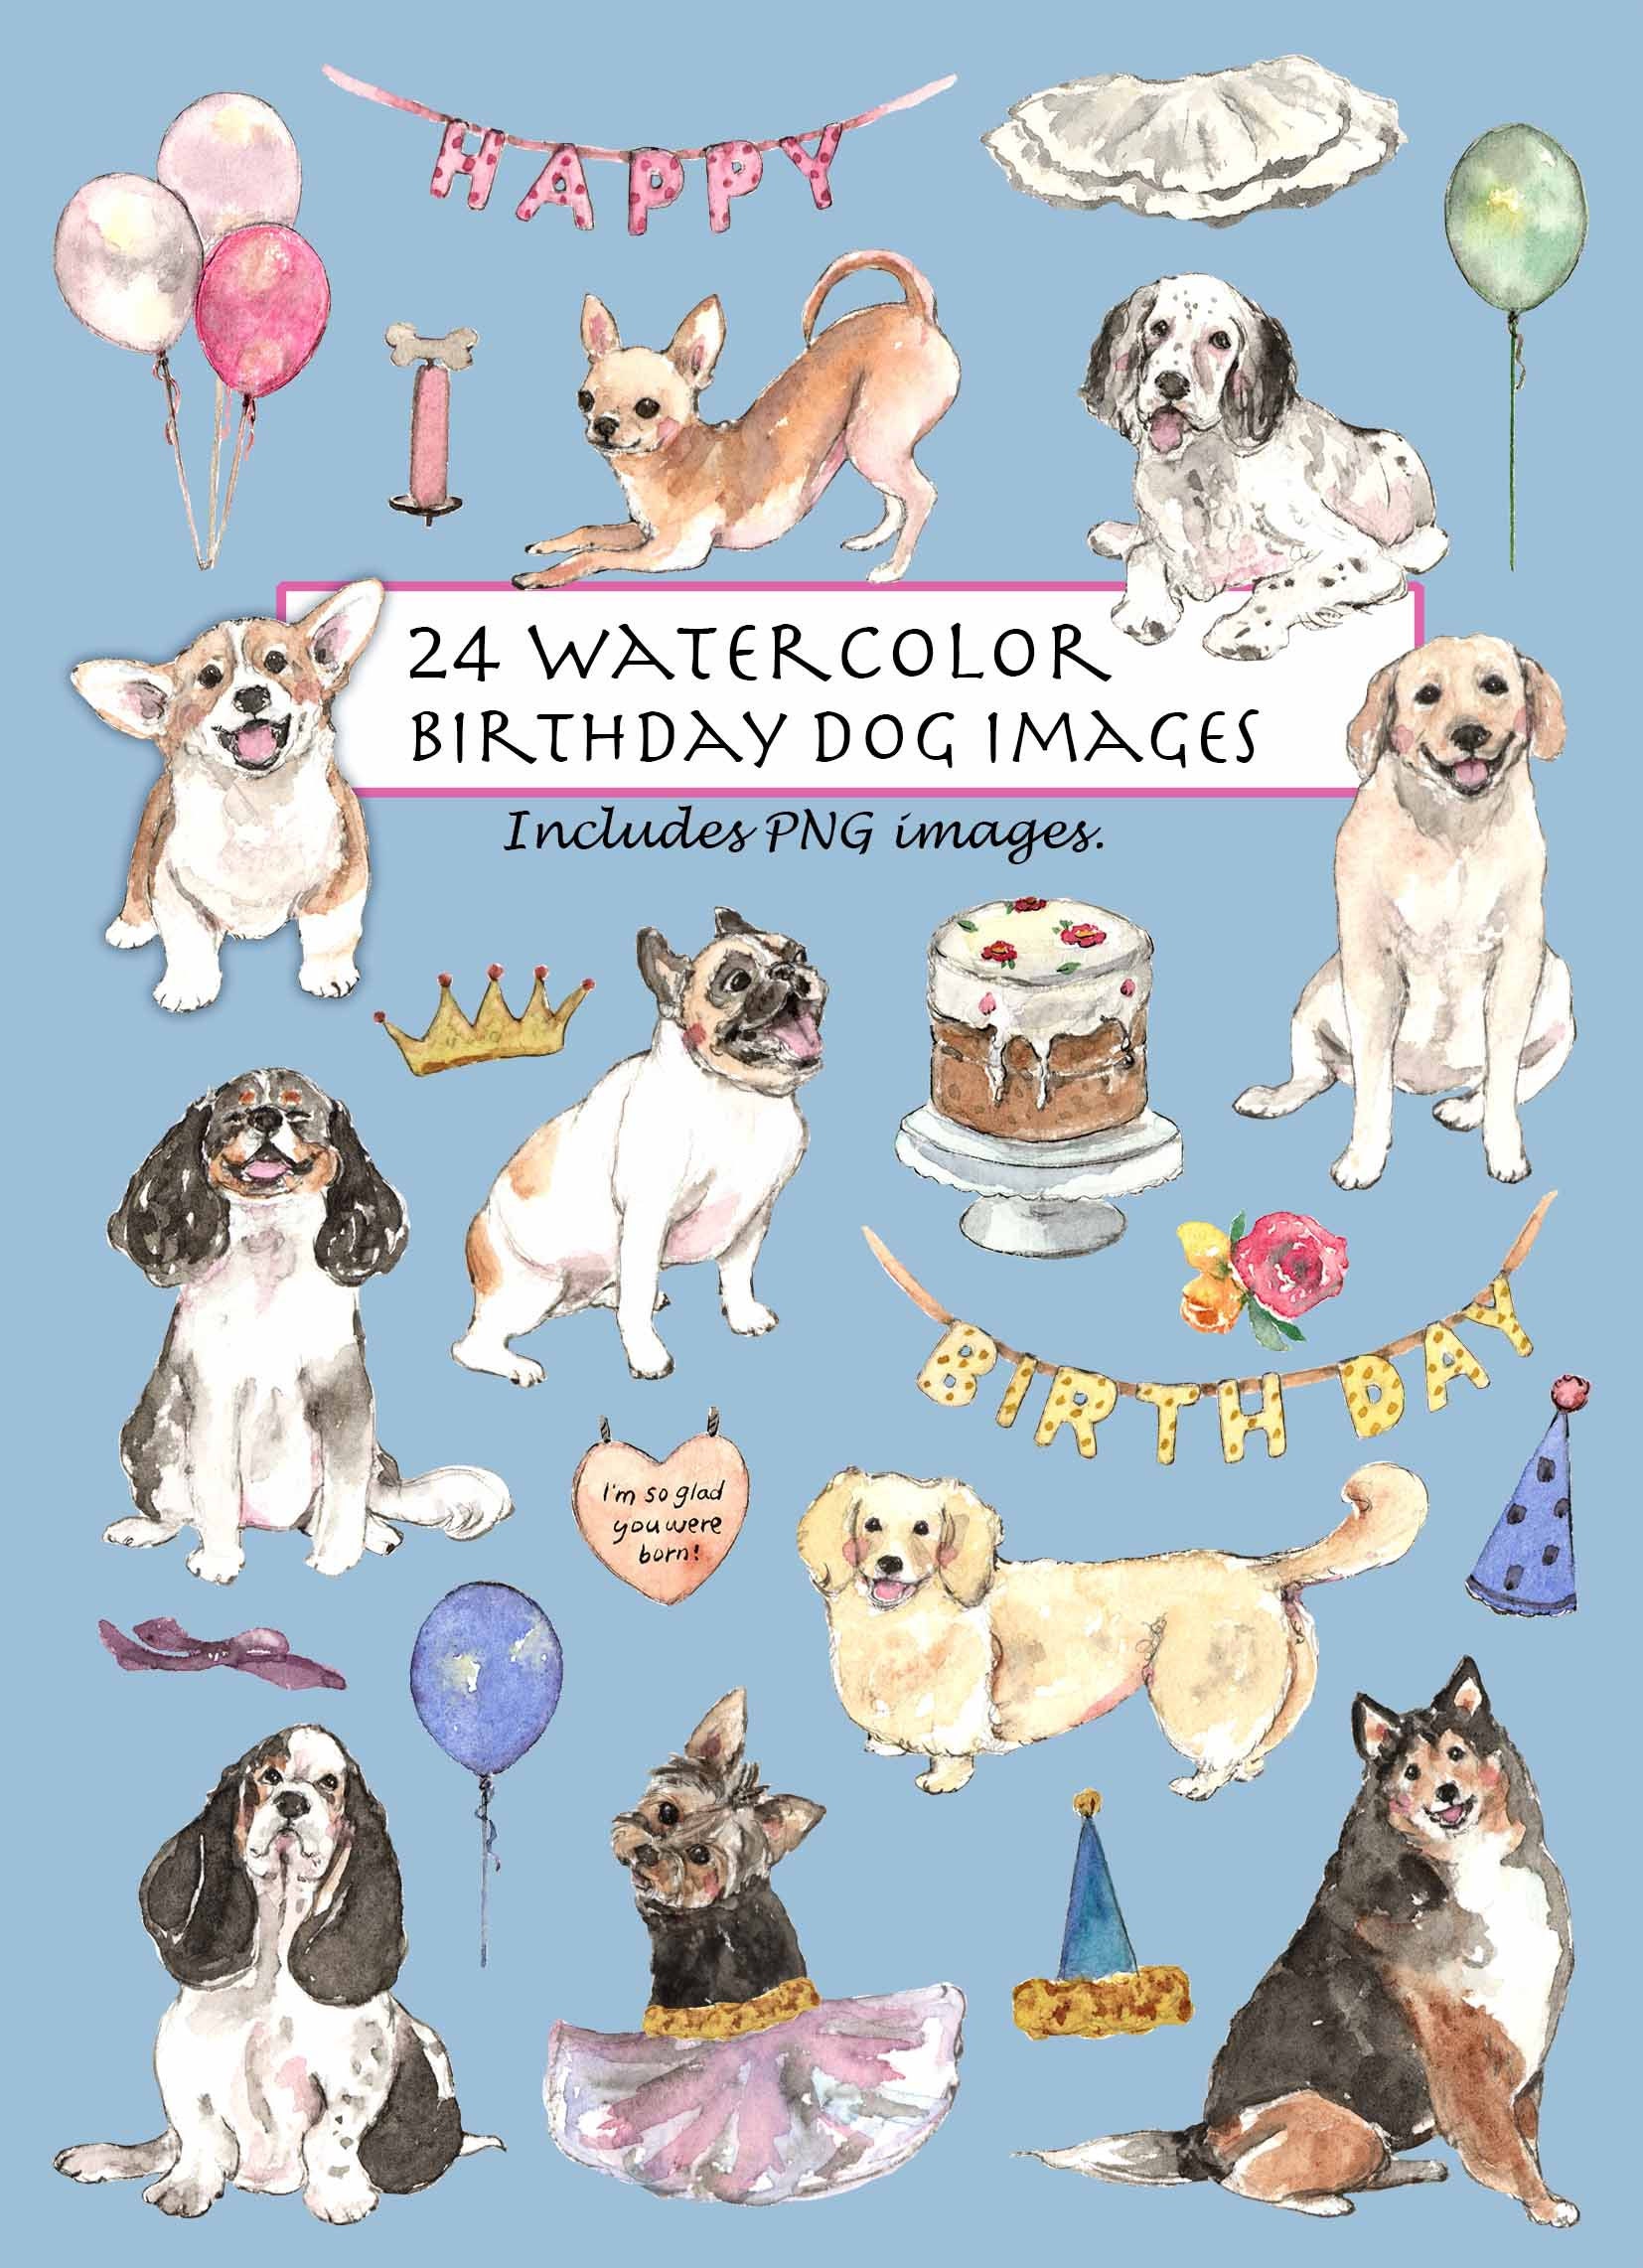 Big Dog Breeds Watercolor Clipart Set. Dog Lovers Gift Instant 